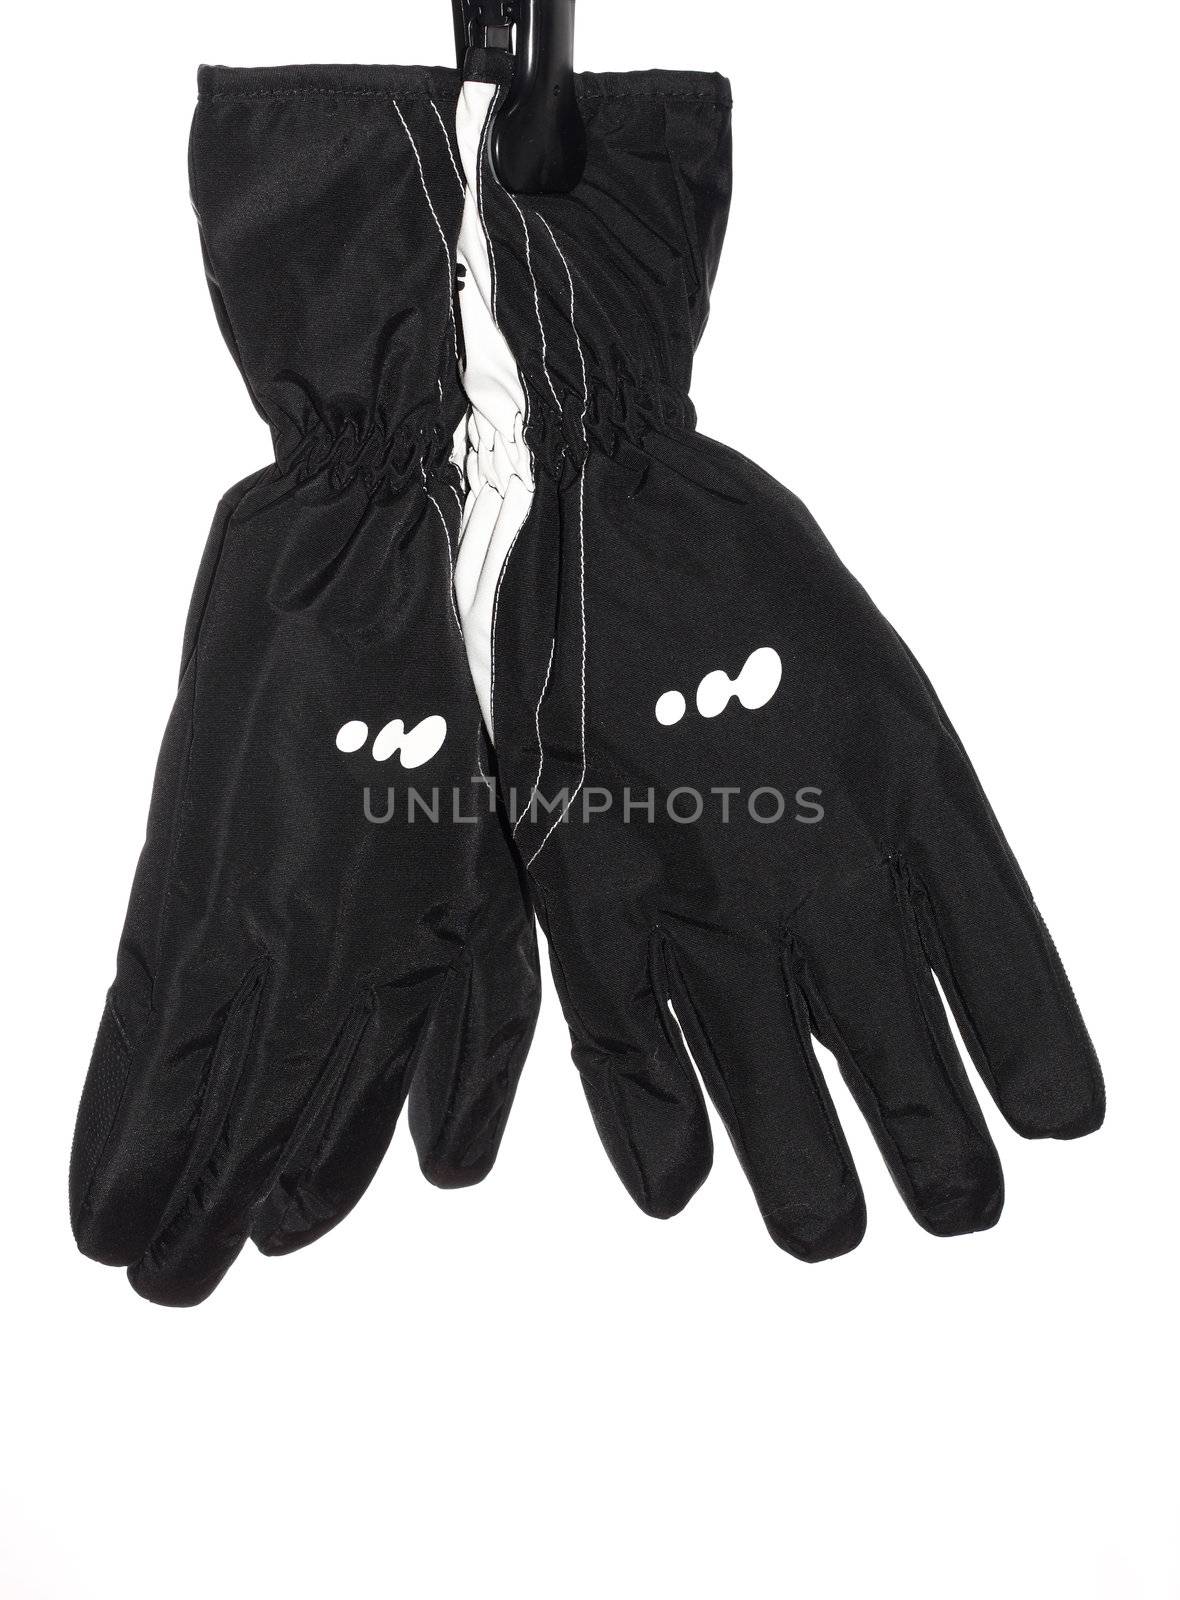 gloves, sports, winter, snowboard, mountain, skis, clothes, hands